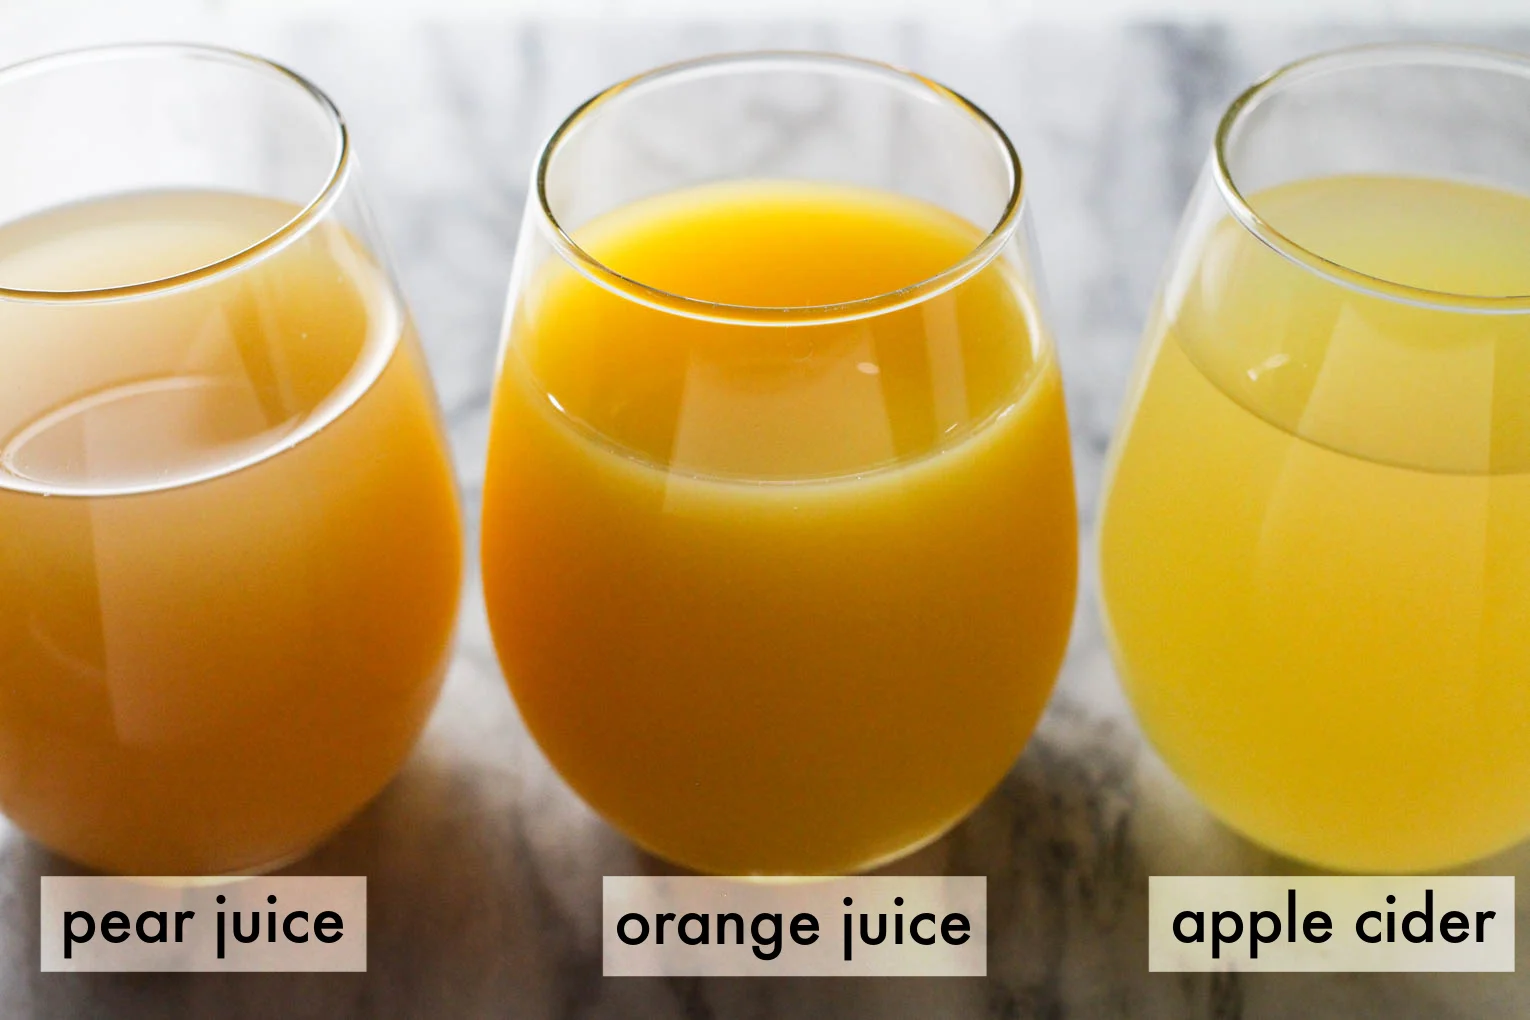 Three glasses with fruit juices standing on marble background. Below each glass, there is a text overlay as follows: pear juice, orange juice, apple cider.